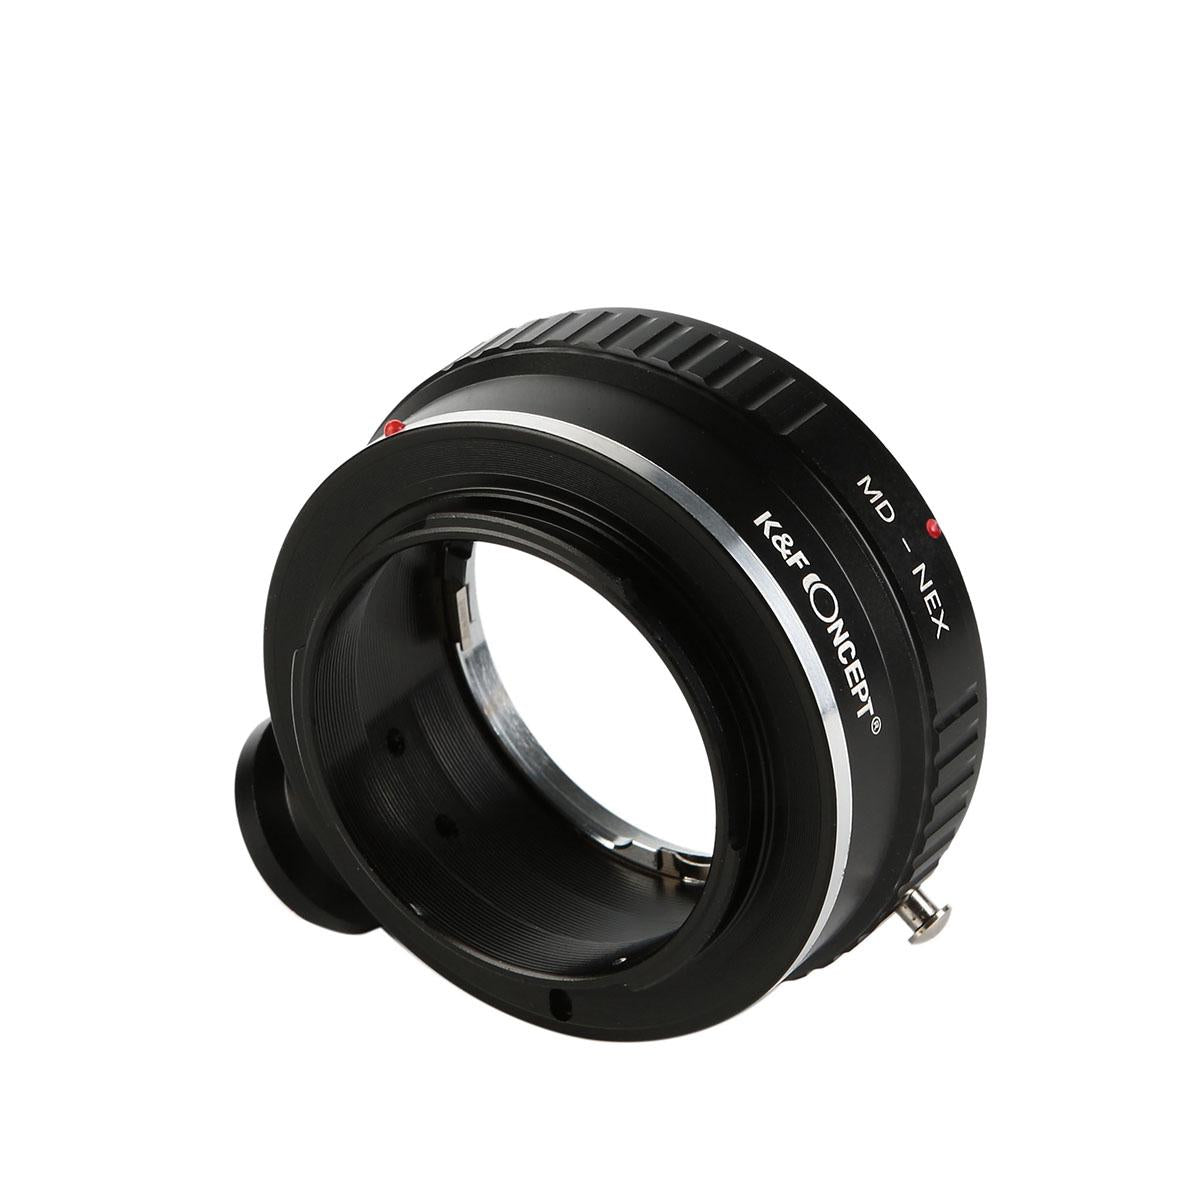 Image of K&F Concept Minolta MD Lenses to Sony E Mount Camera Adapter with Tripod Mount